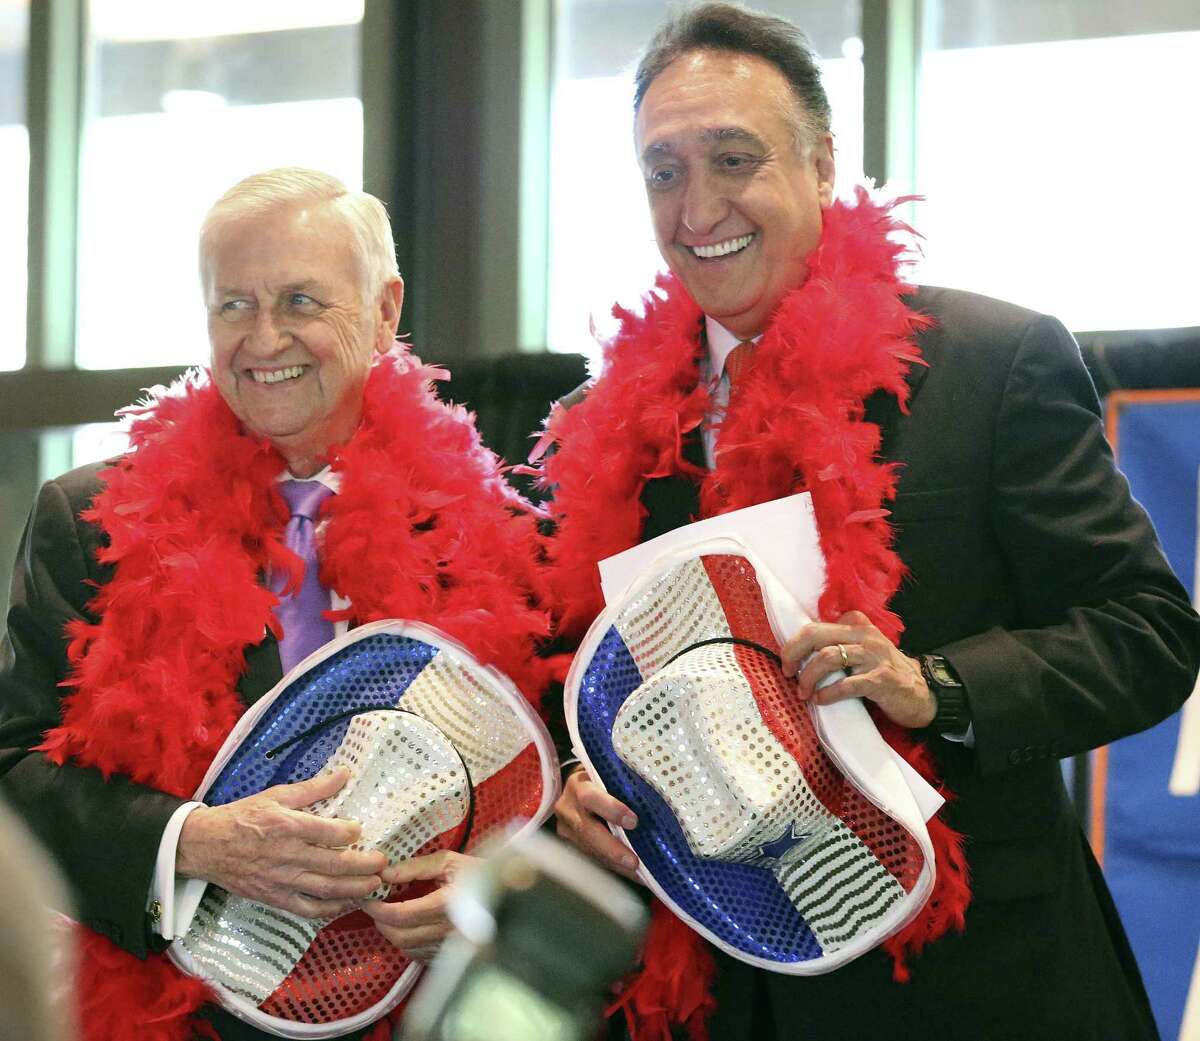 Emcees John Montford and Henry Cisneros are asked to wear special attire for their appearance at a luncheon for the Greater San Antonio After-School All-Stars program at the Briscoe Western Art Museum on April 4, 2018.